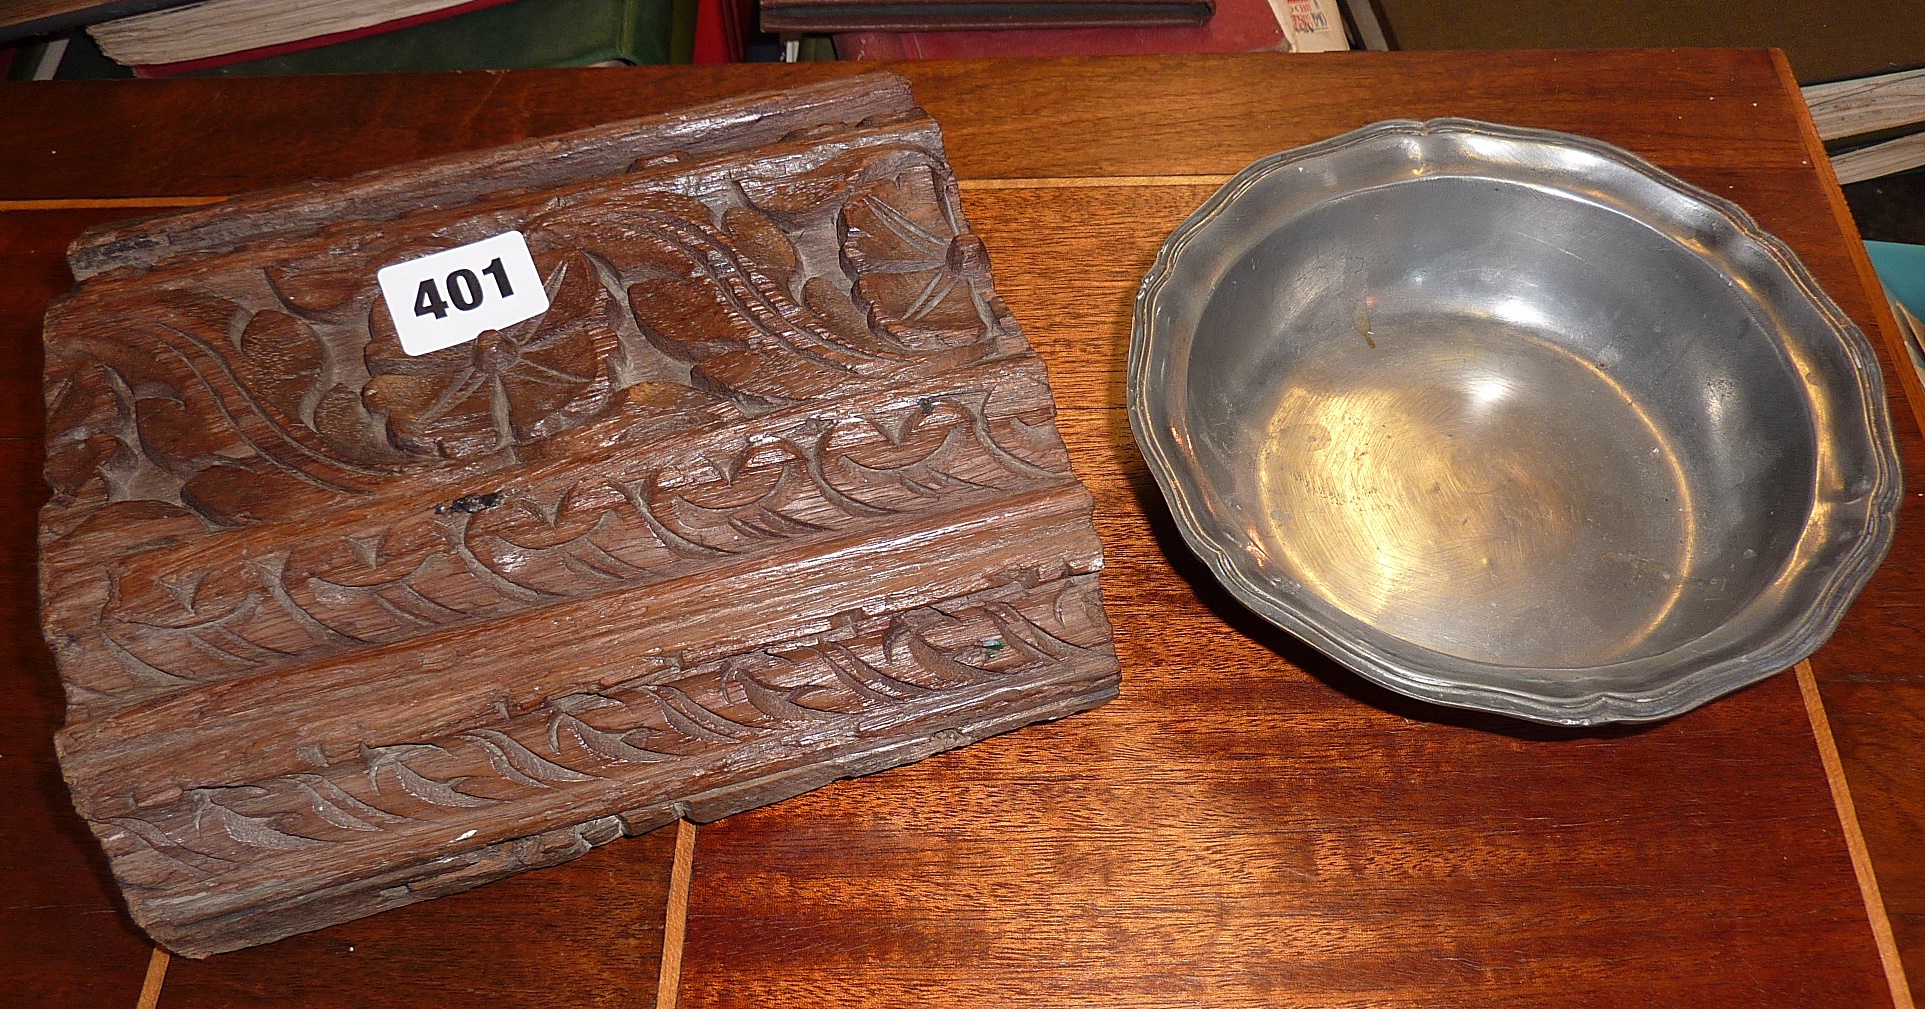 A section of a 17th c. carved oak beam and a pewter bowl